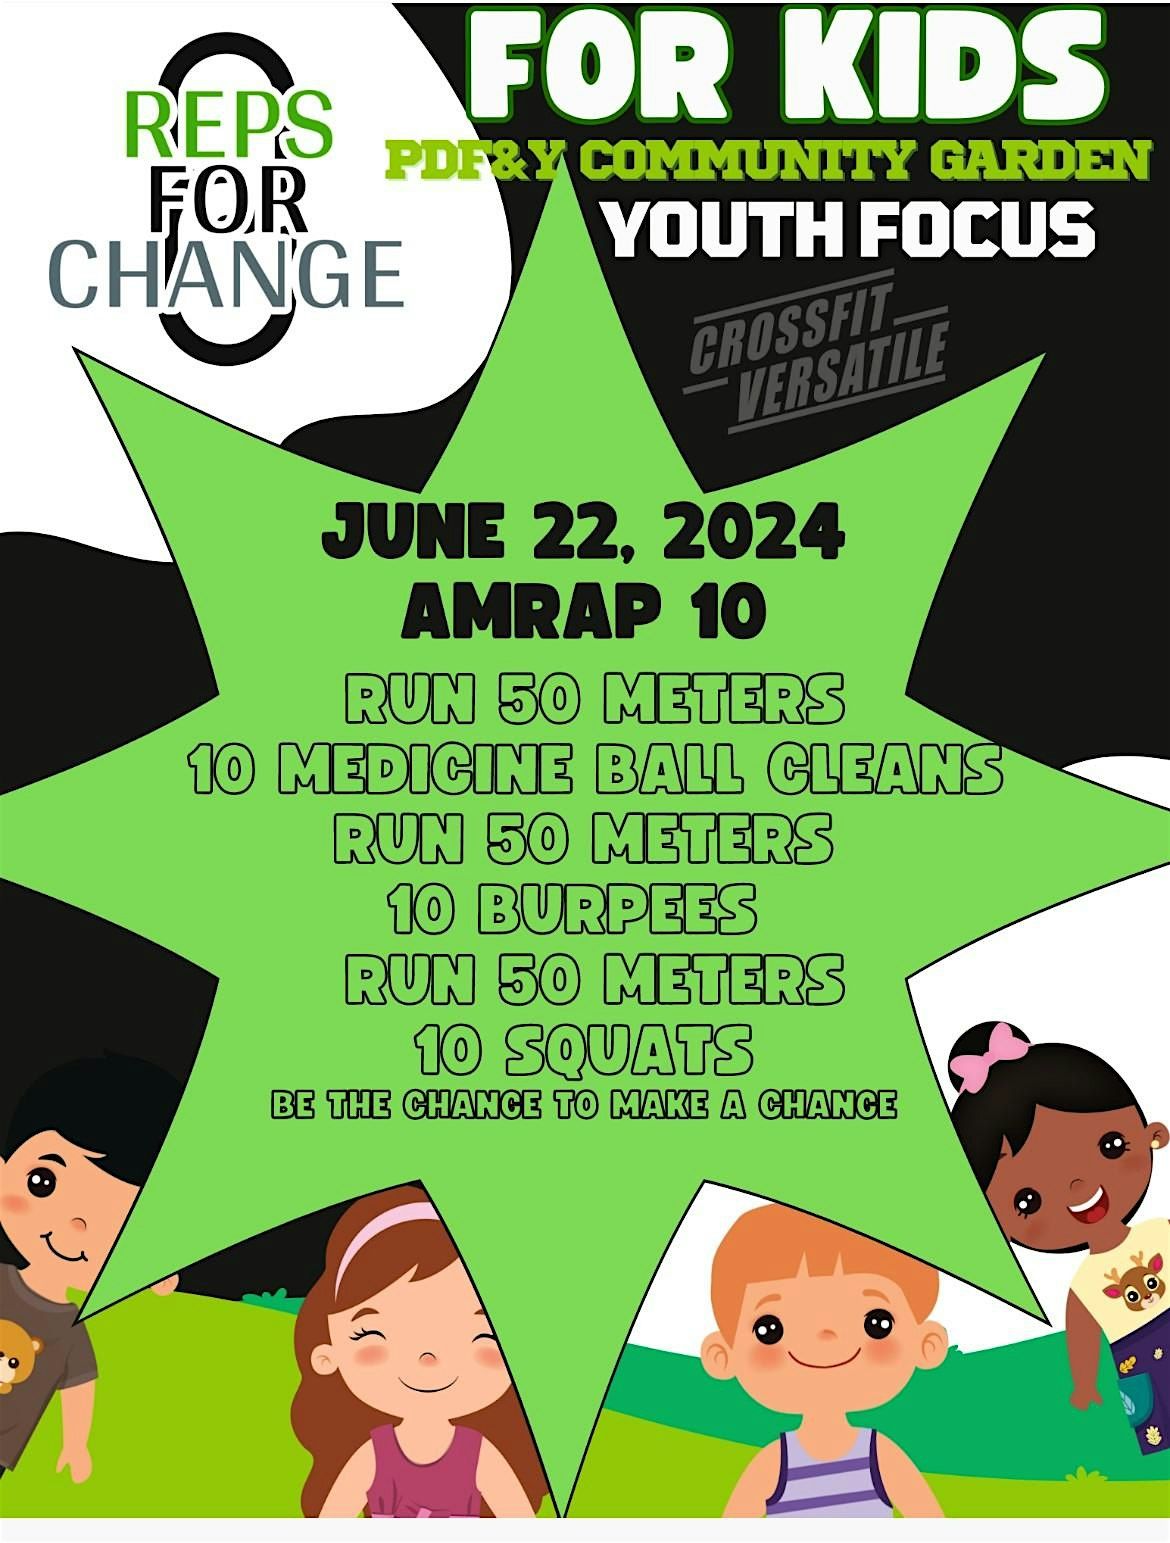 Reps for Change- Kids Version